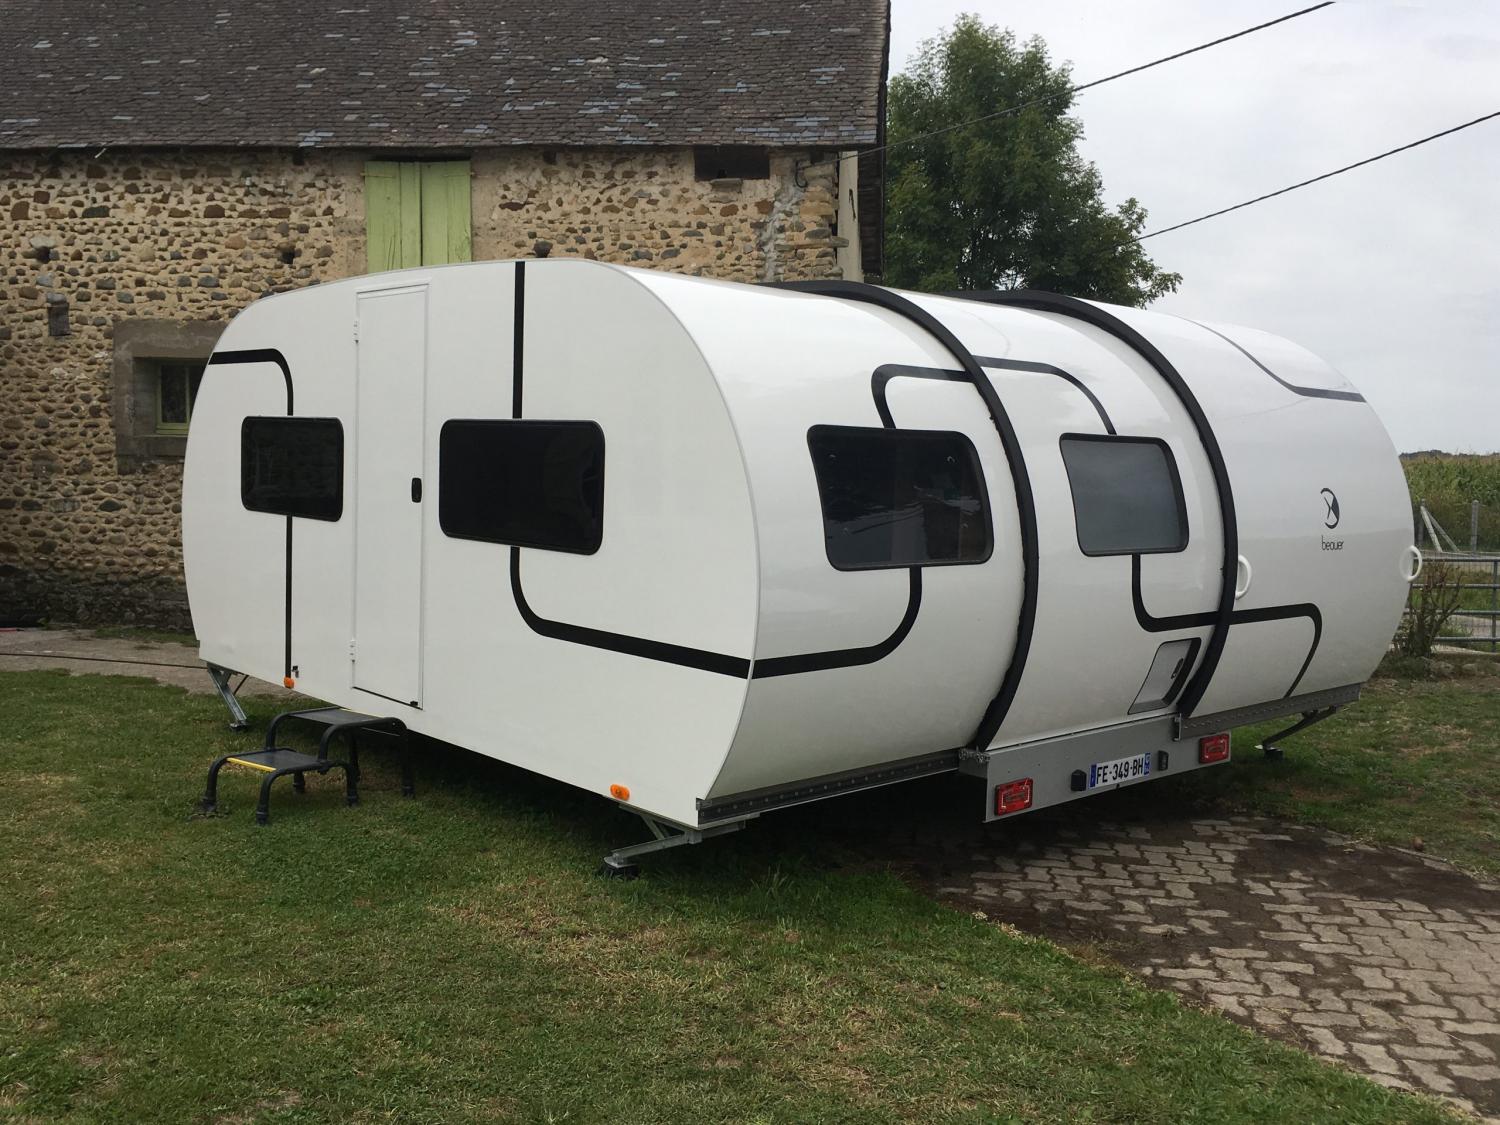 BeauEr 3X Travel Trailer Expands to Triple Its Size In Seconds